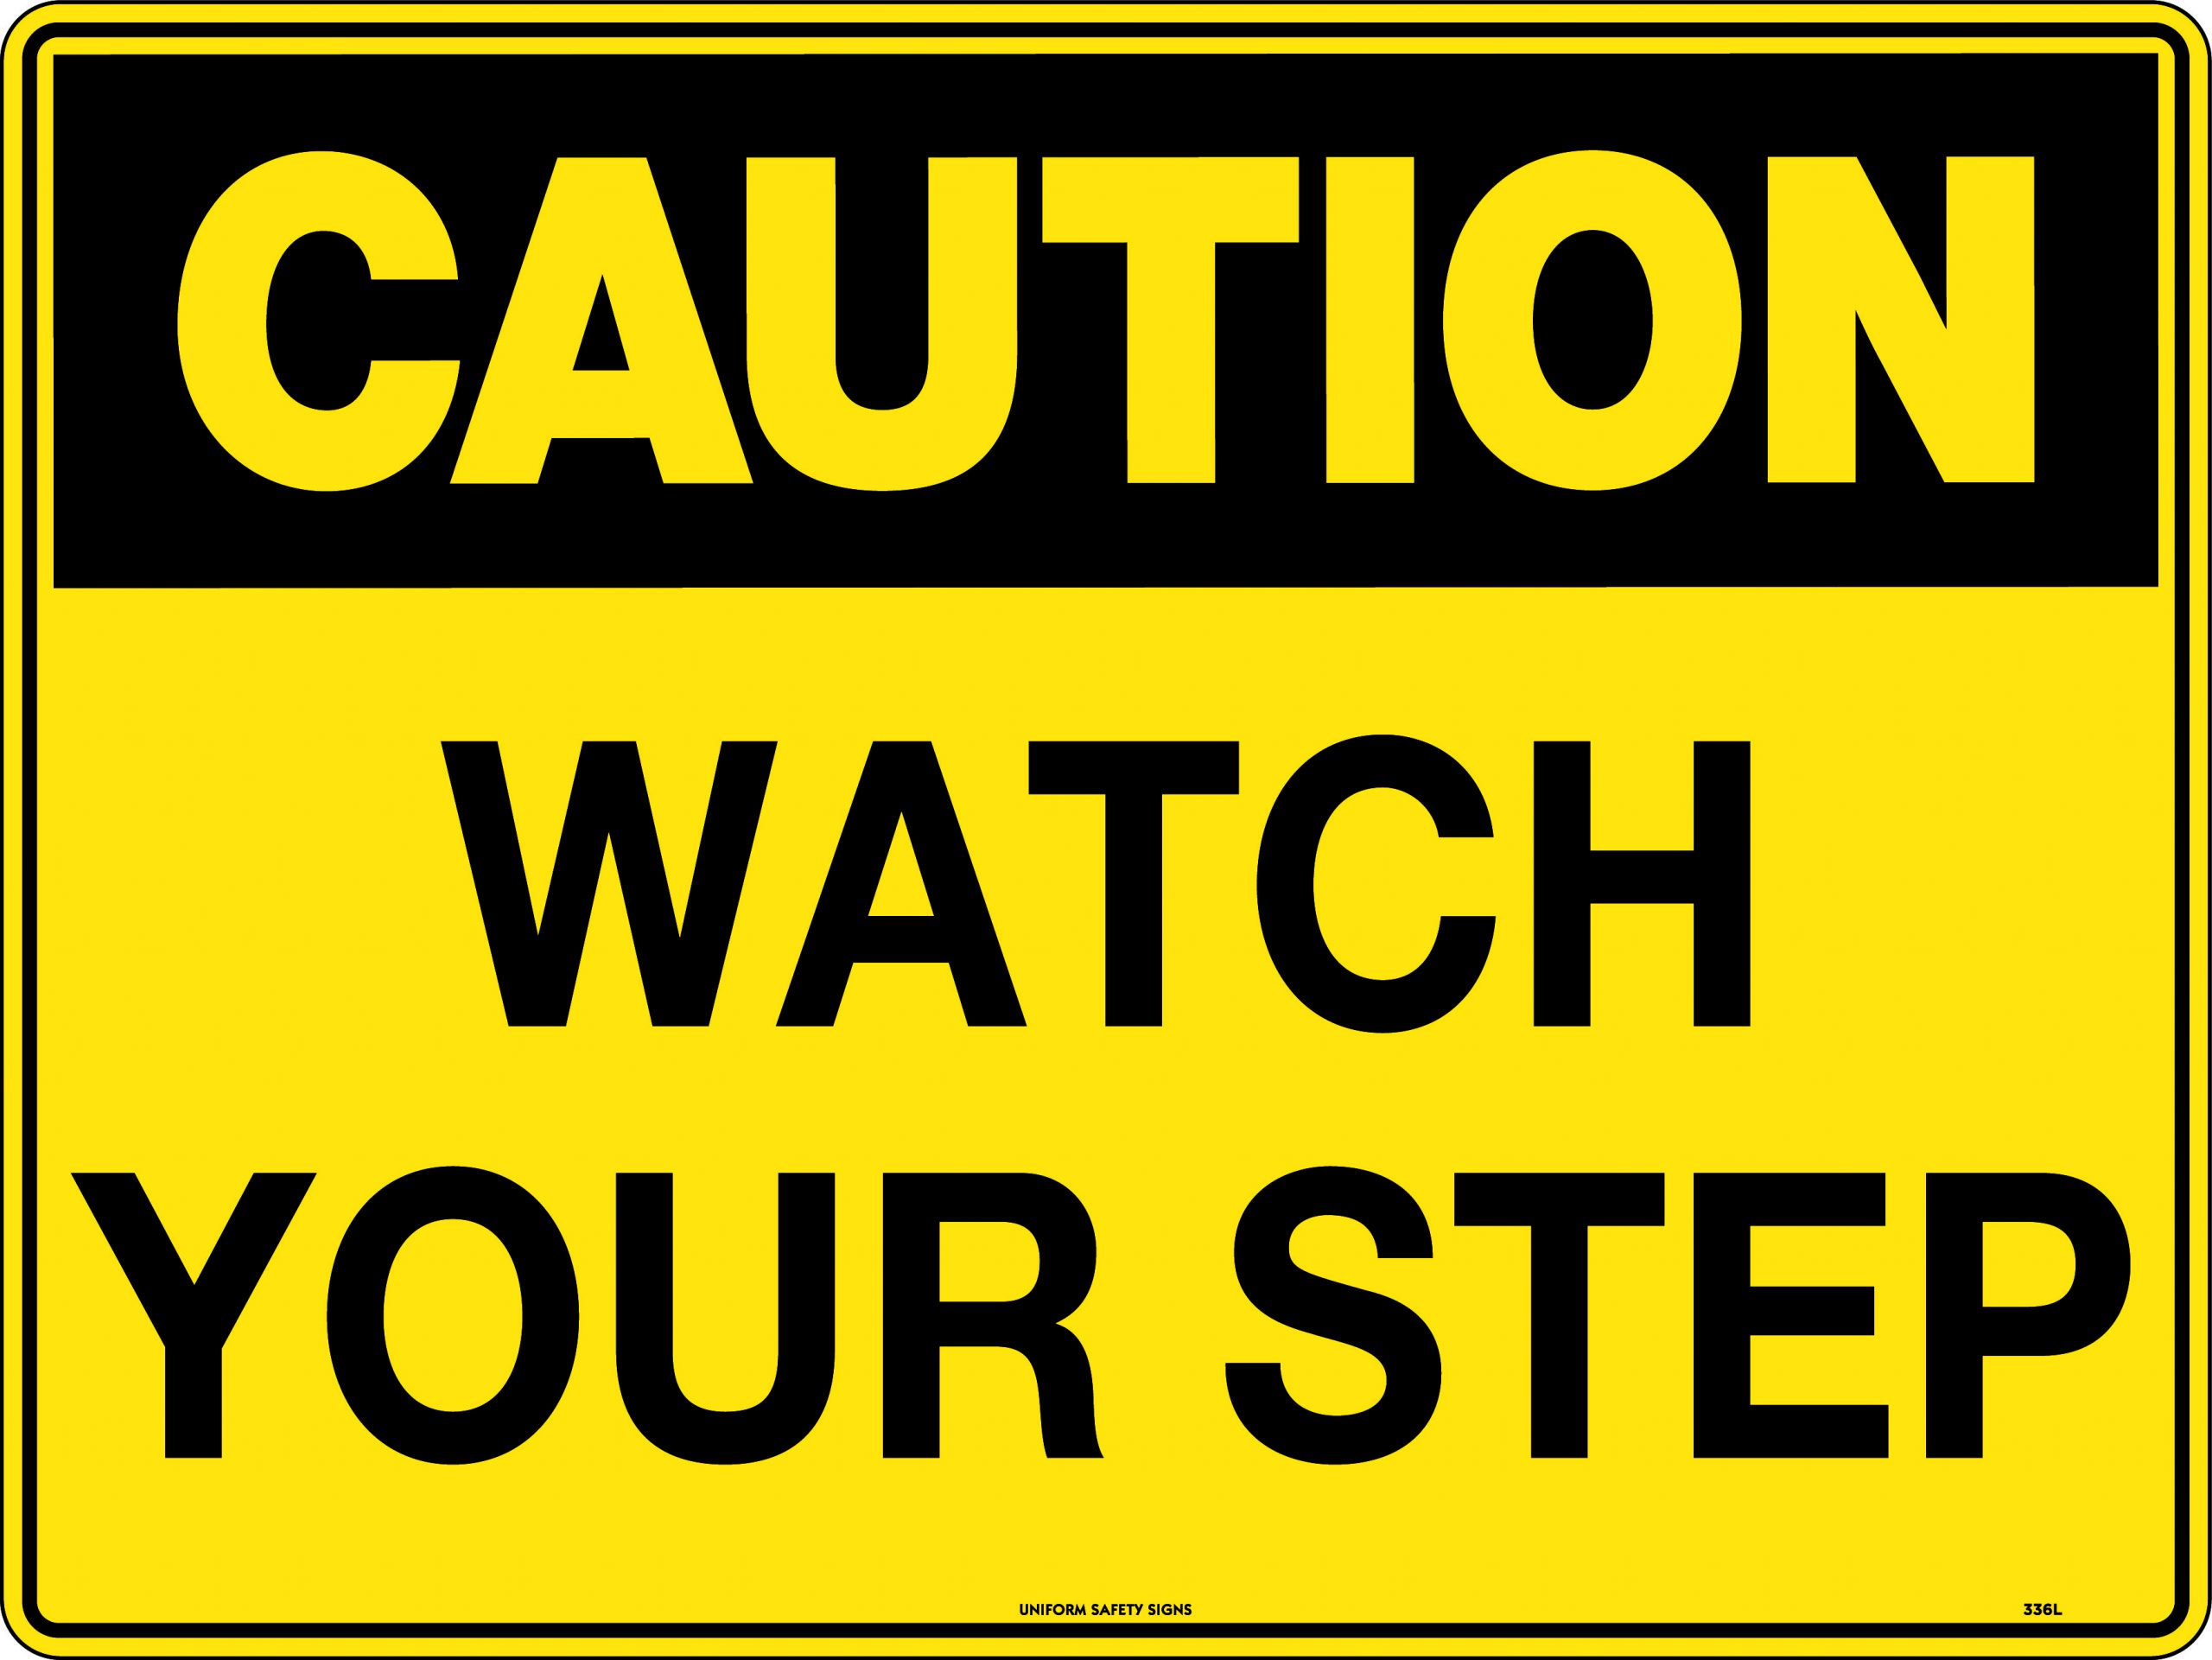 caution-watch-your-step-caution-signs-uss